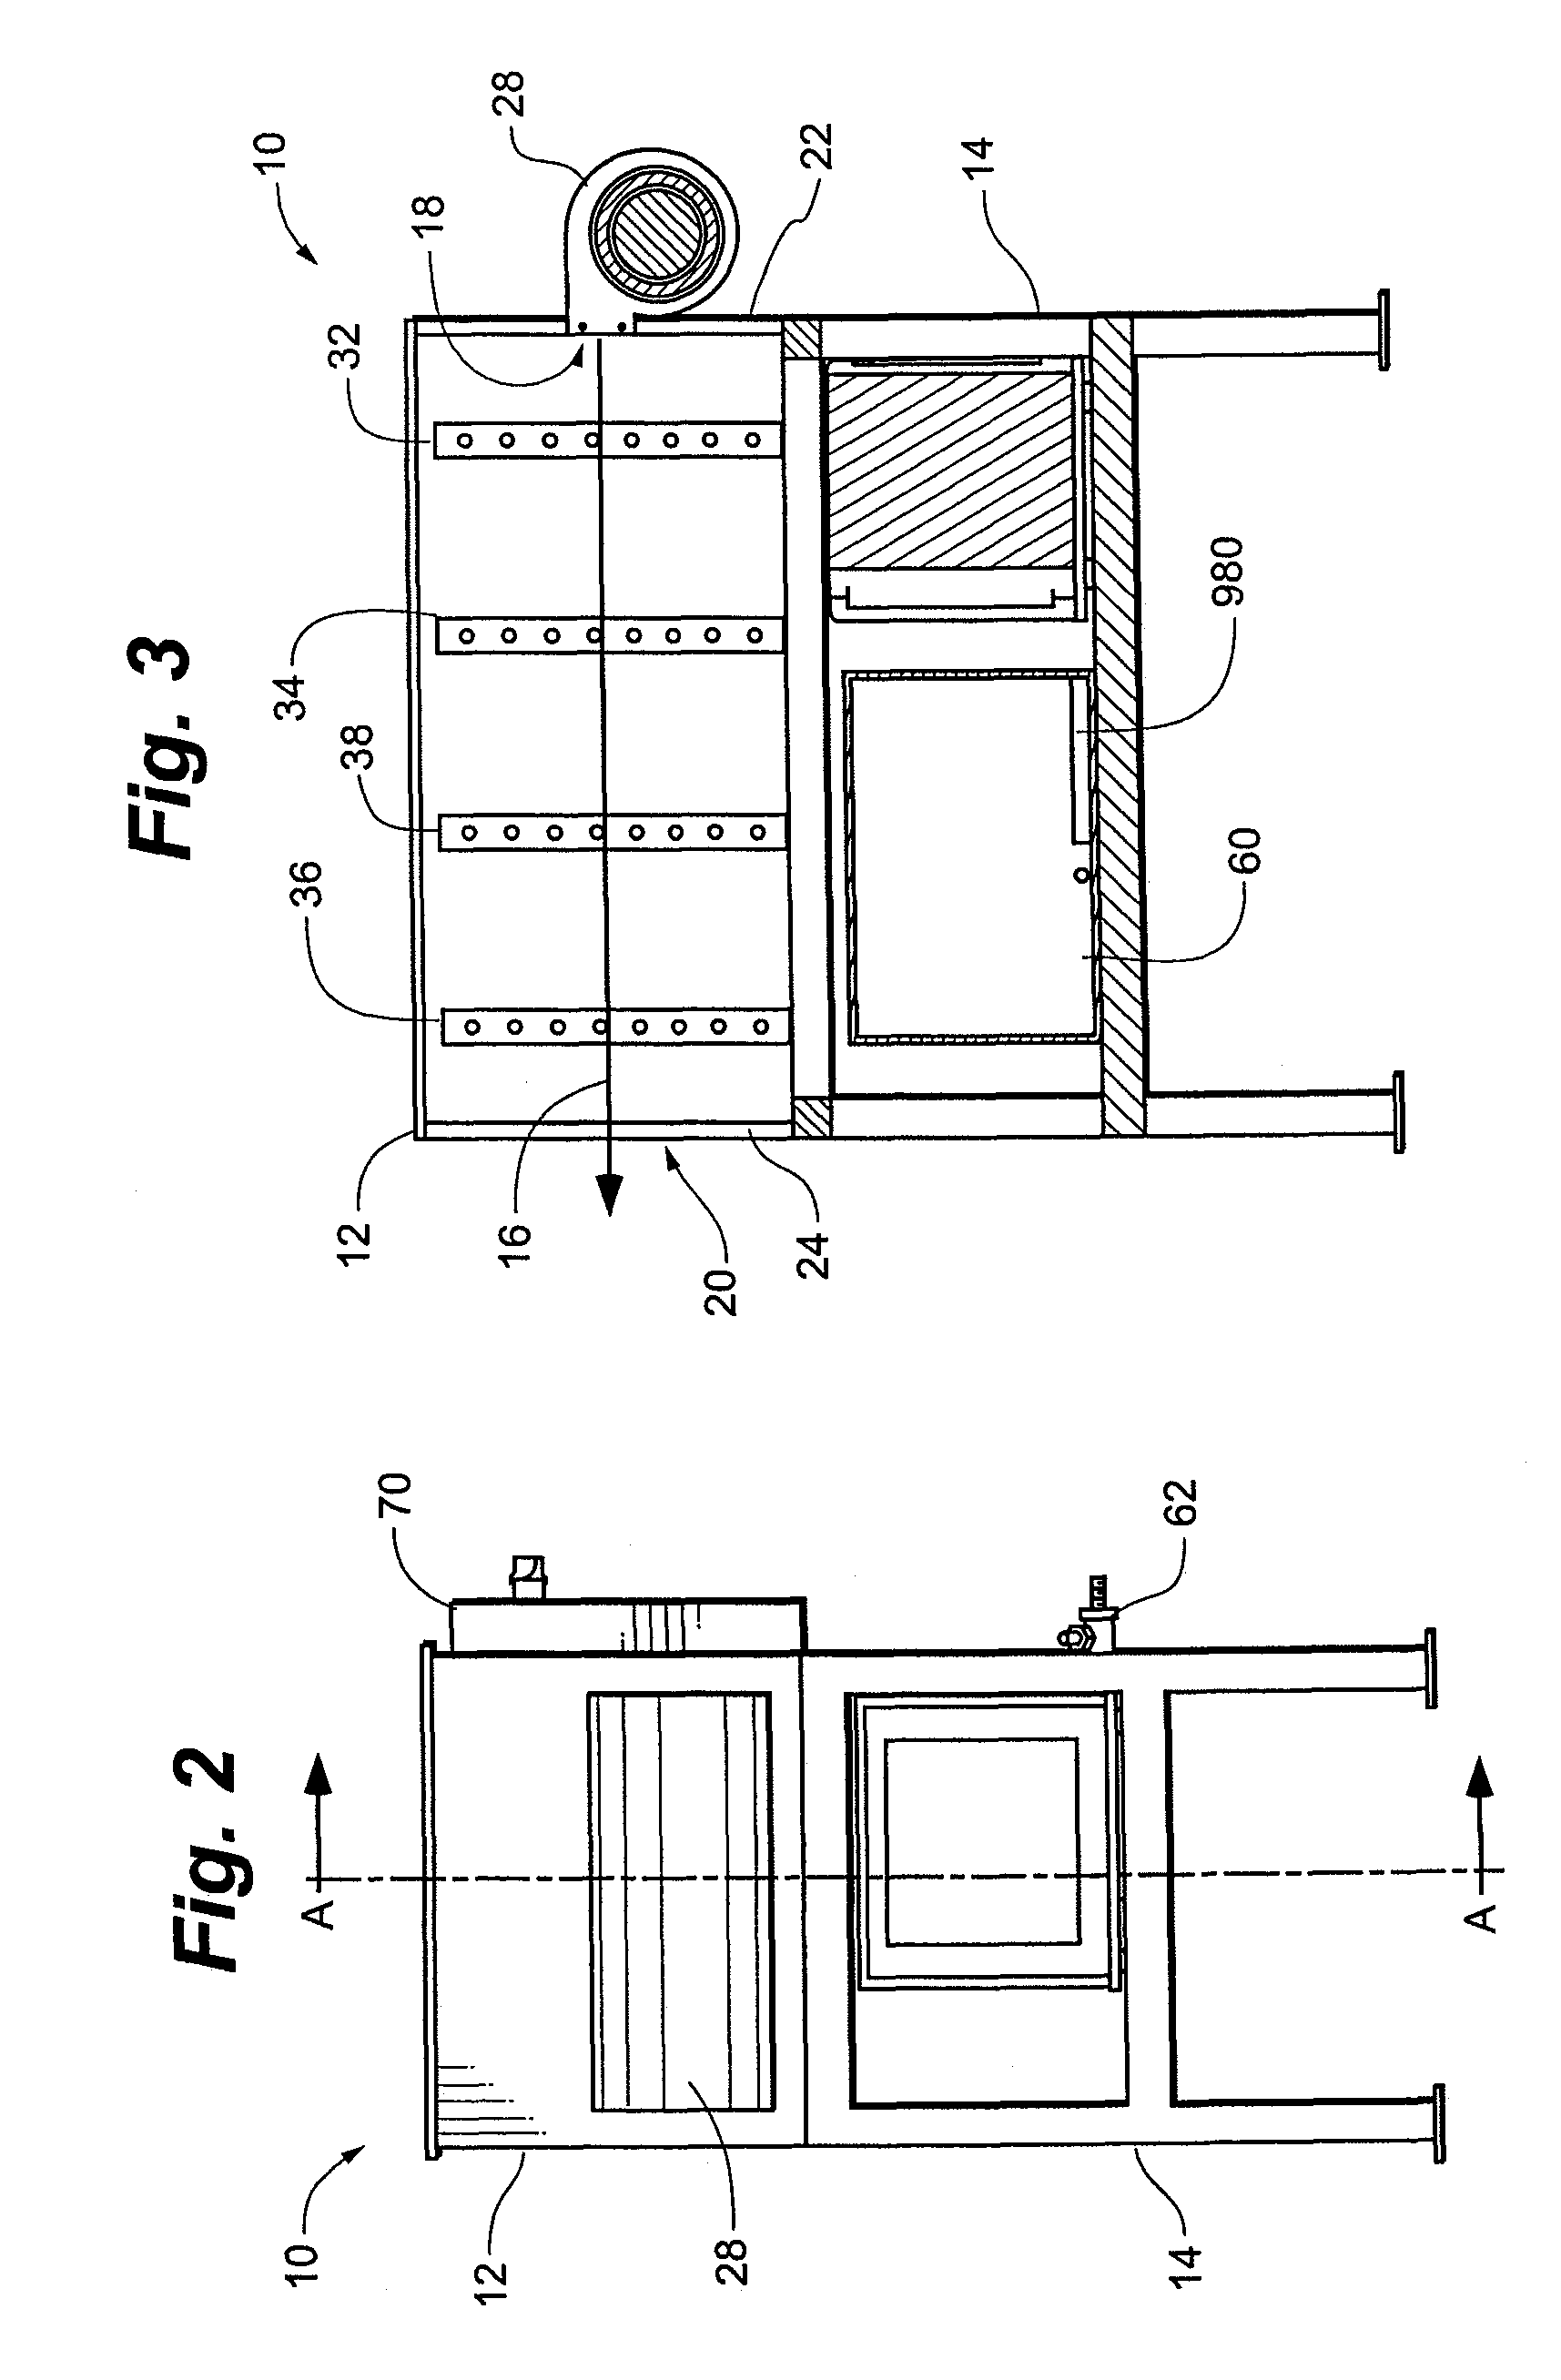 Machines and methods for removing water from air